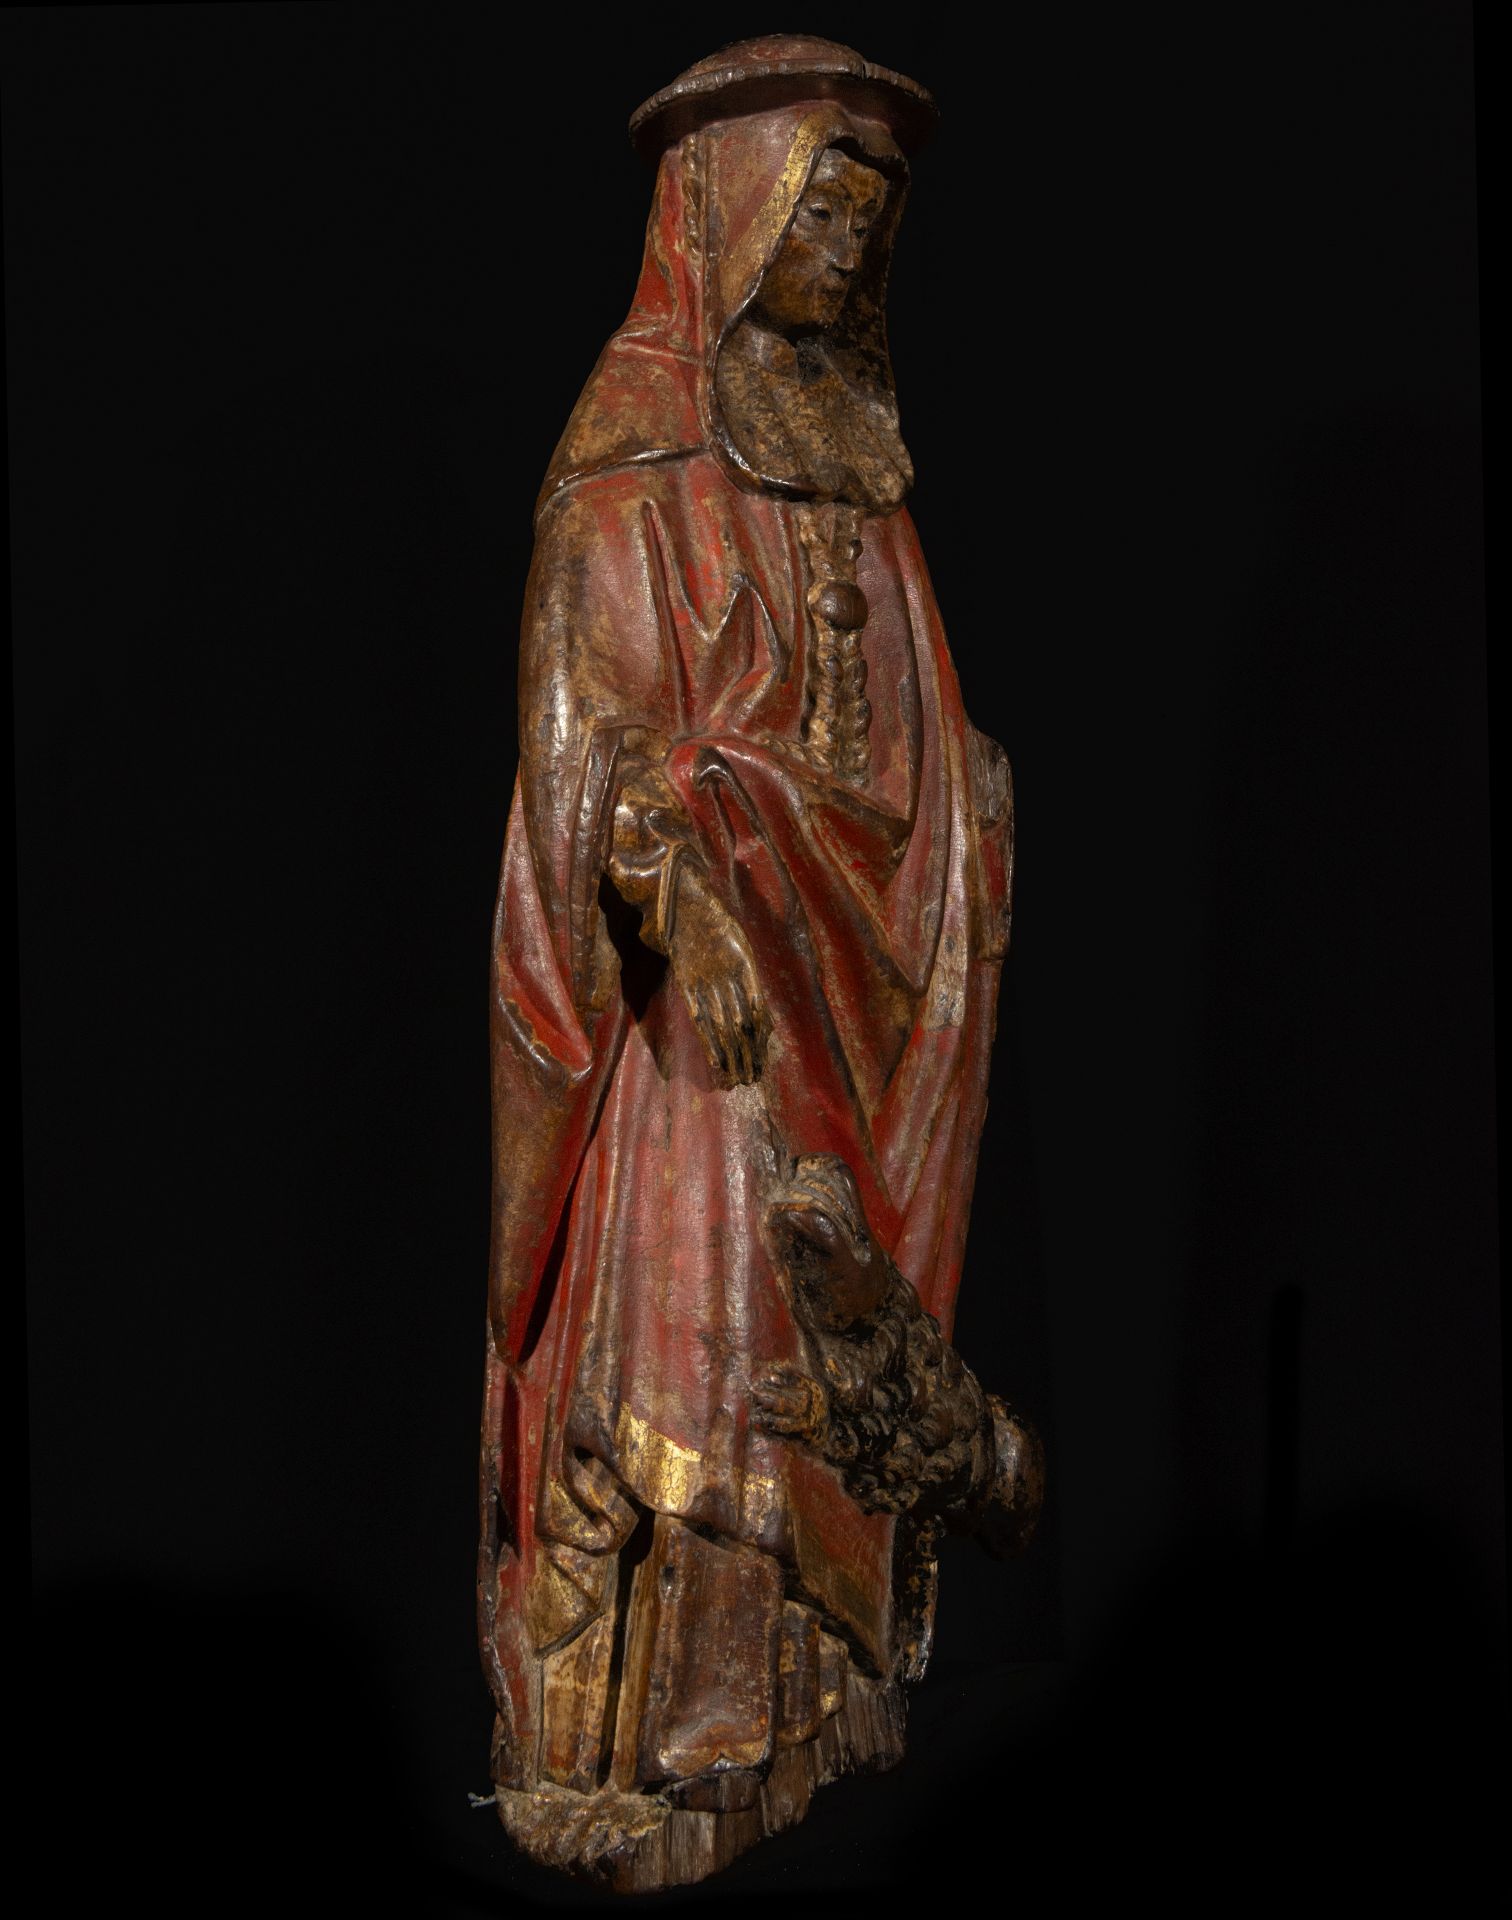 Spectacular Gothic Carving from Mechelen of Cardenal from the 15th century, with original polychrome - Image 4 of 7